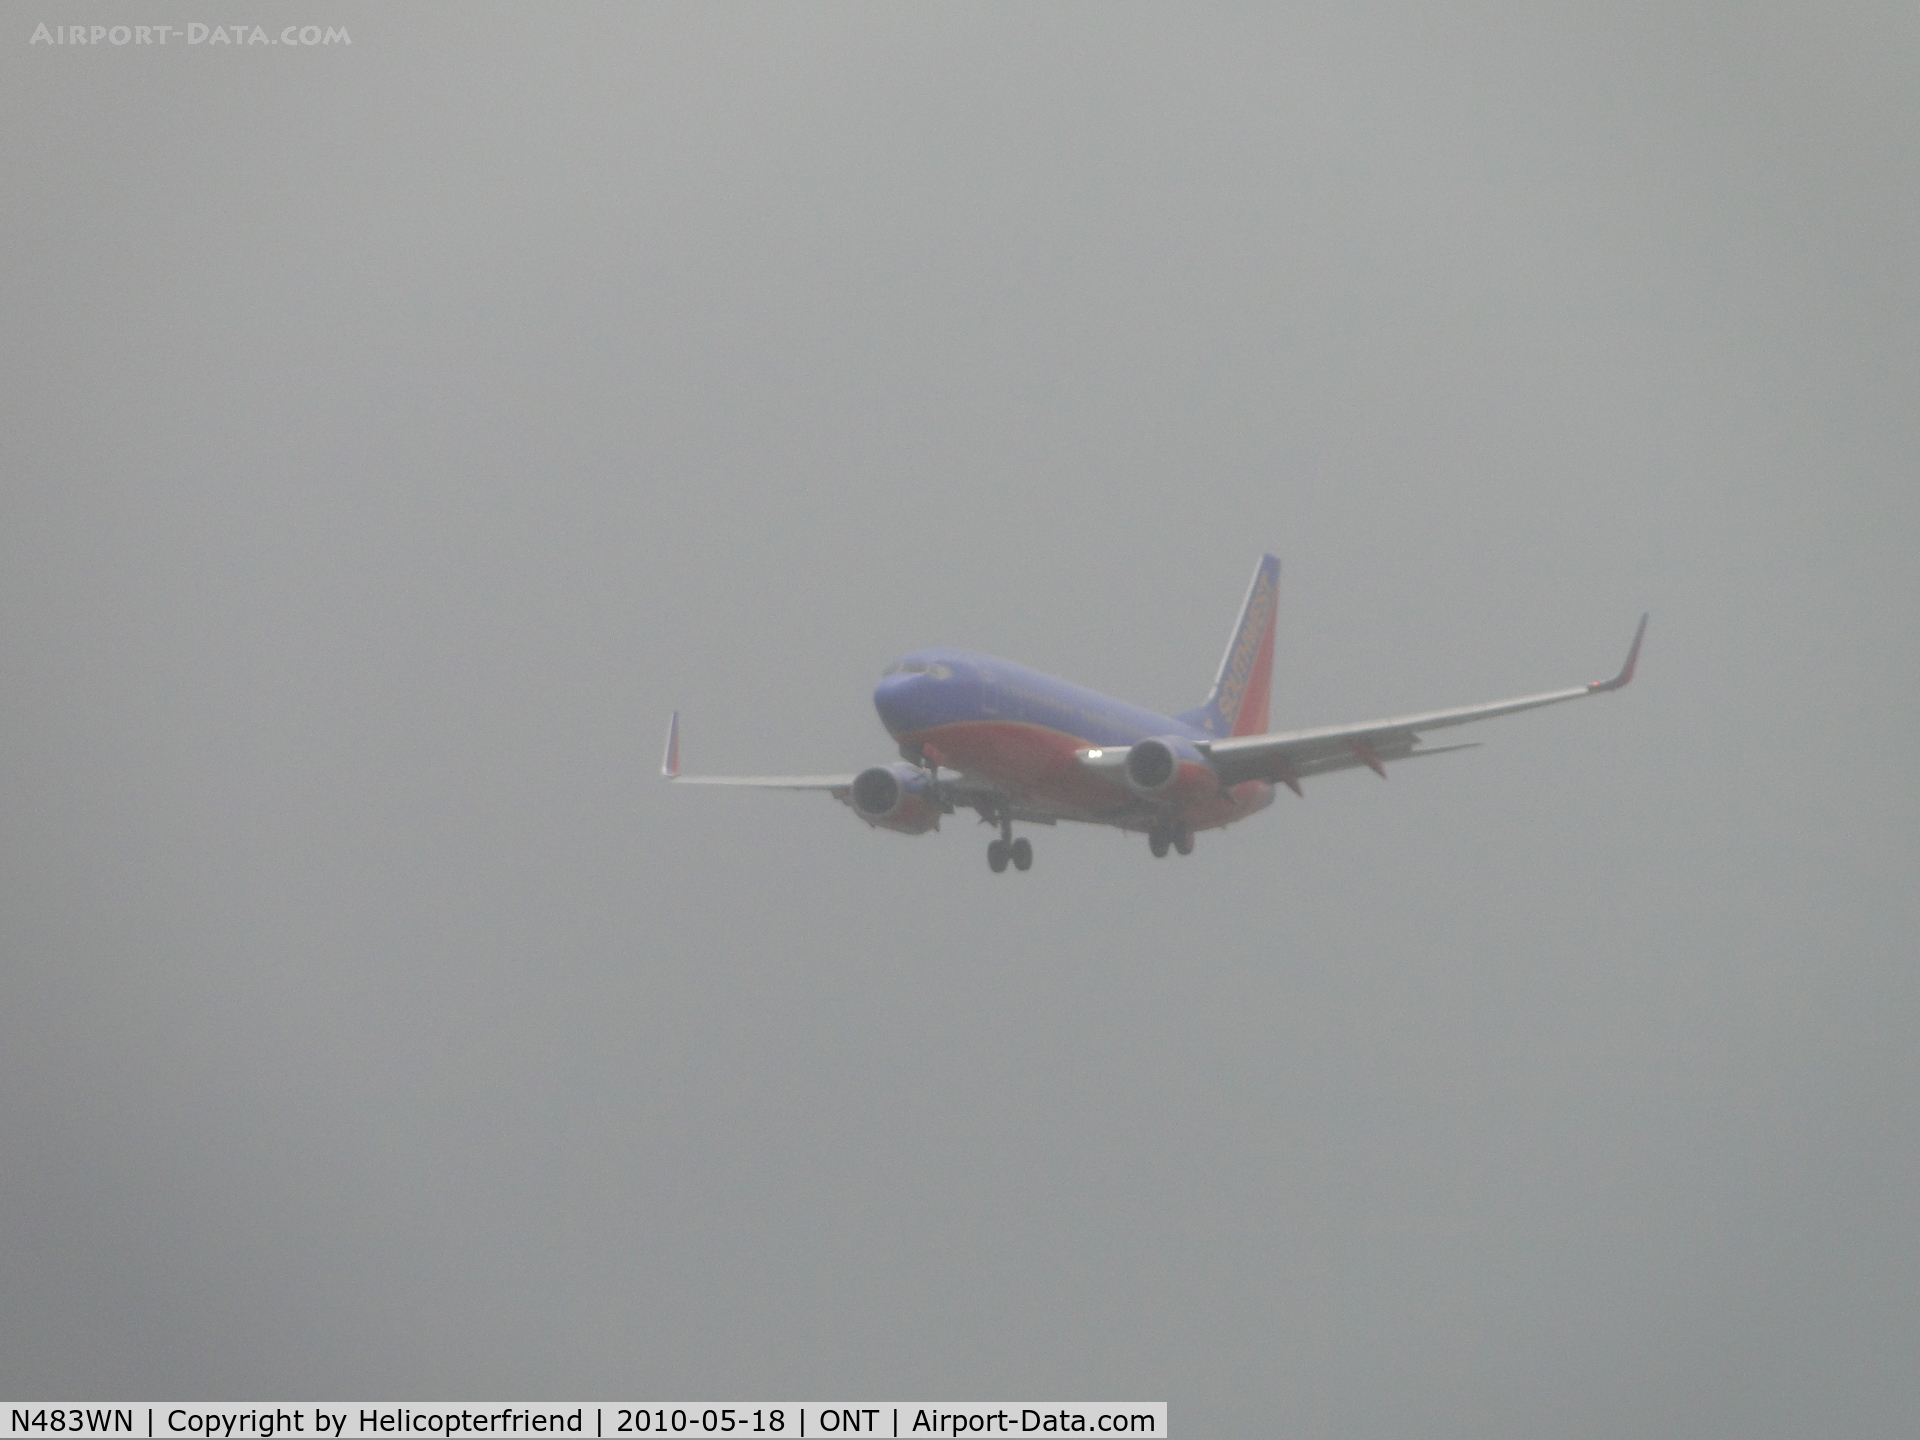 N483WN, 2004 Boeing 737-7H4 C/N 32472, On final out of the low clouds and drizzle